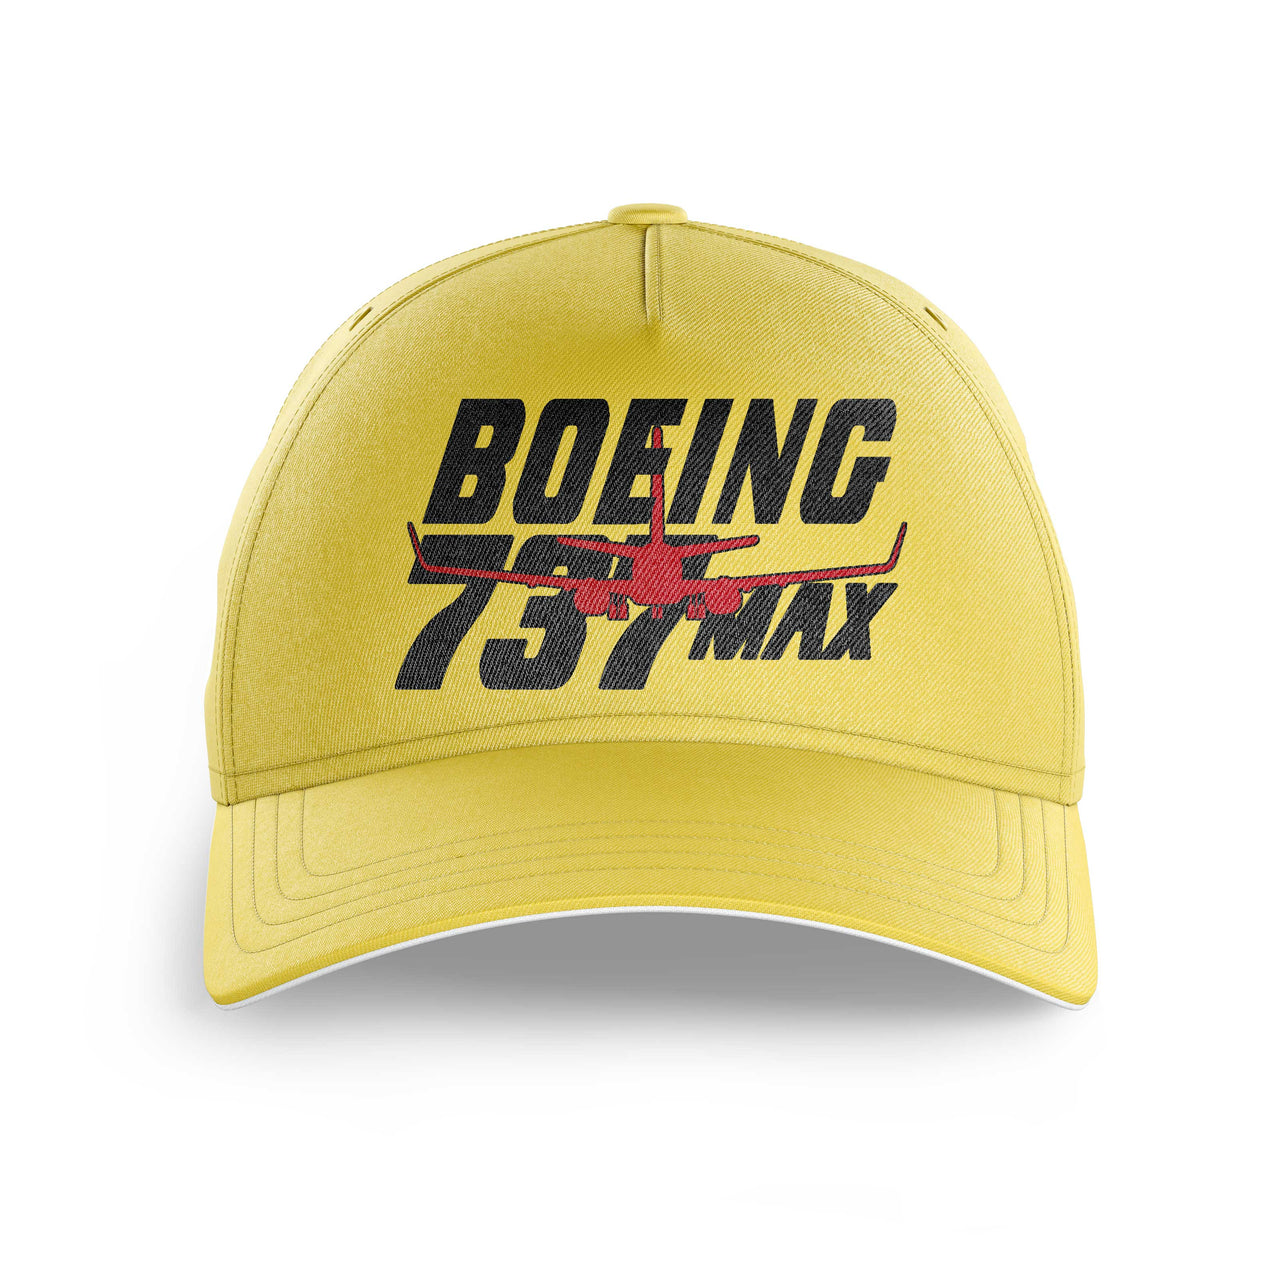 Amazing Boeing 737 Max Printed Hats